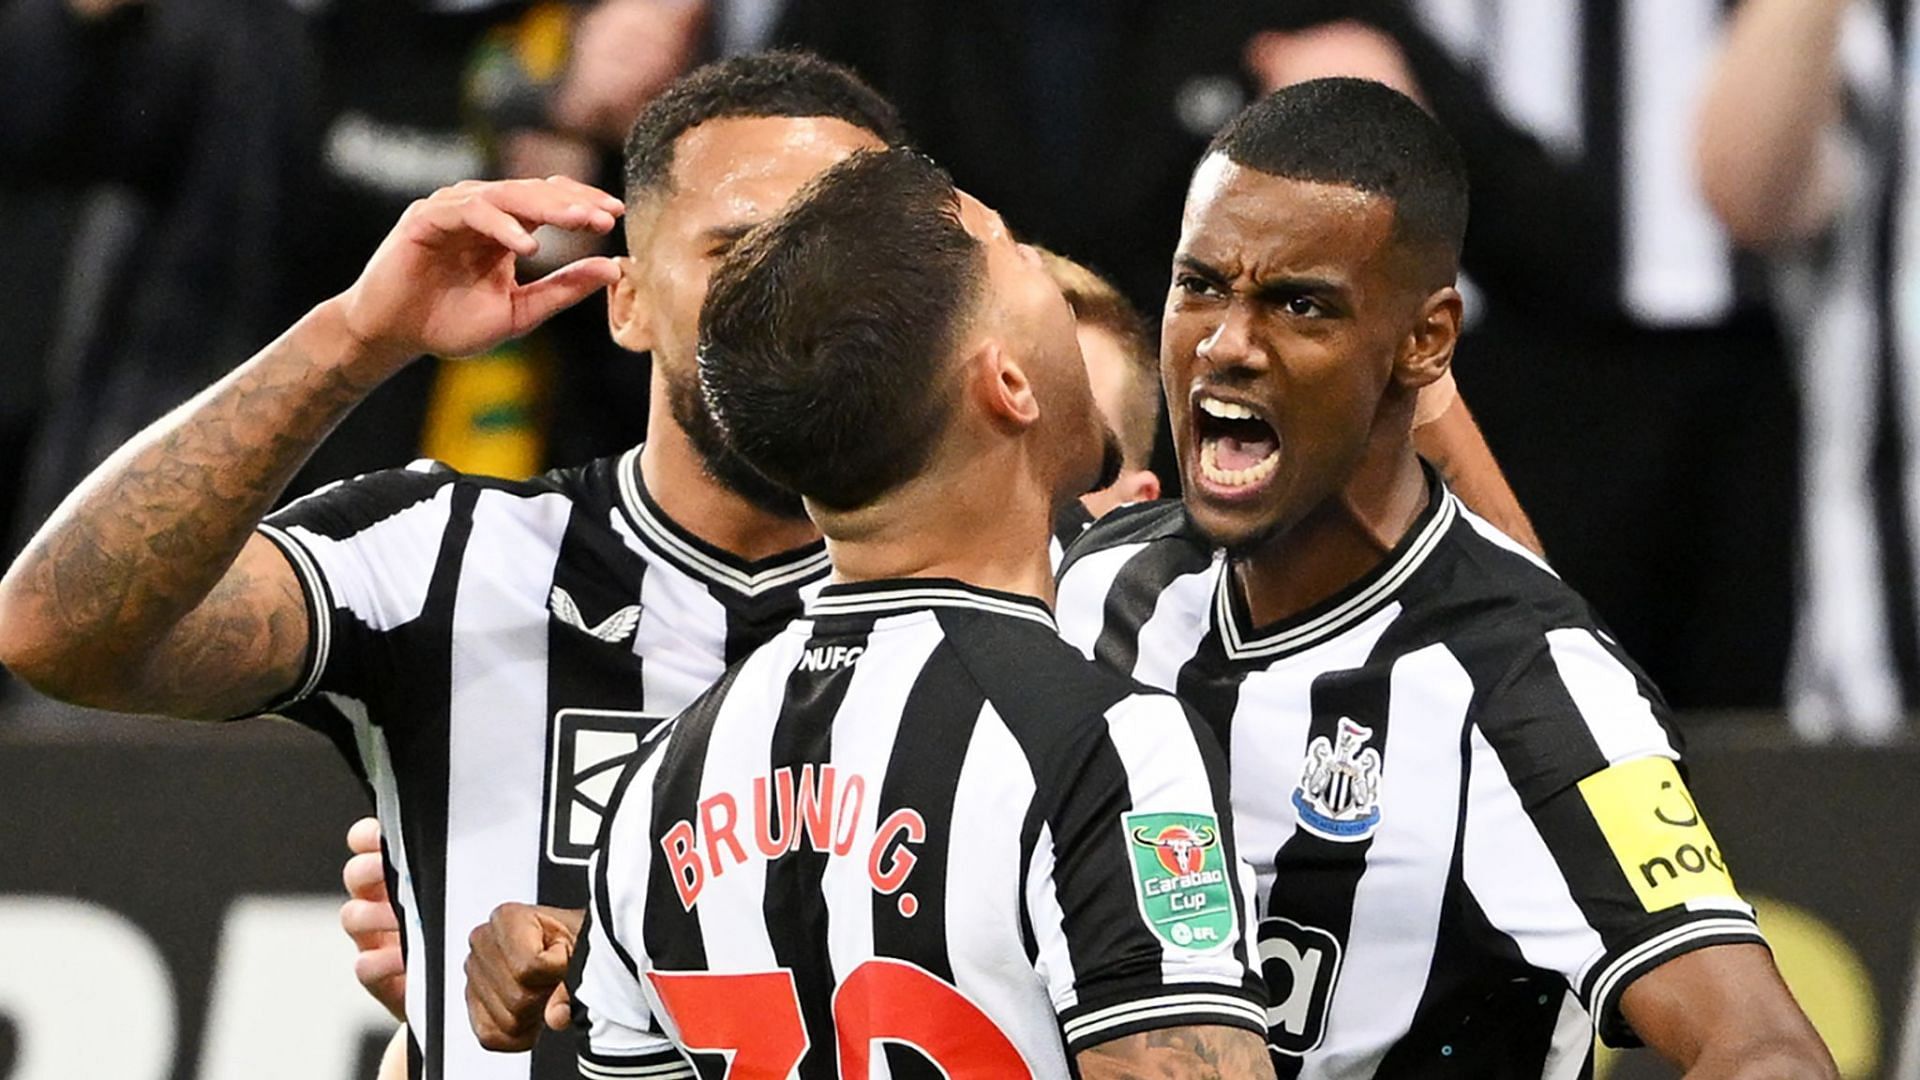 Newcastle United secured a narrow 1-0 win over Manchester City. 